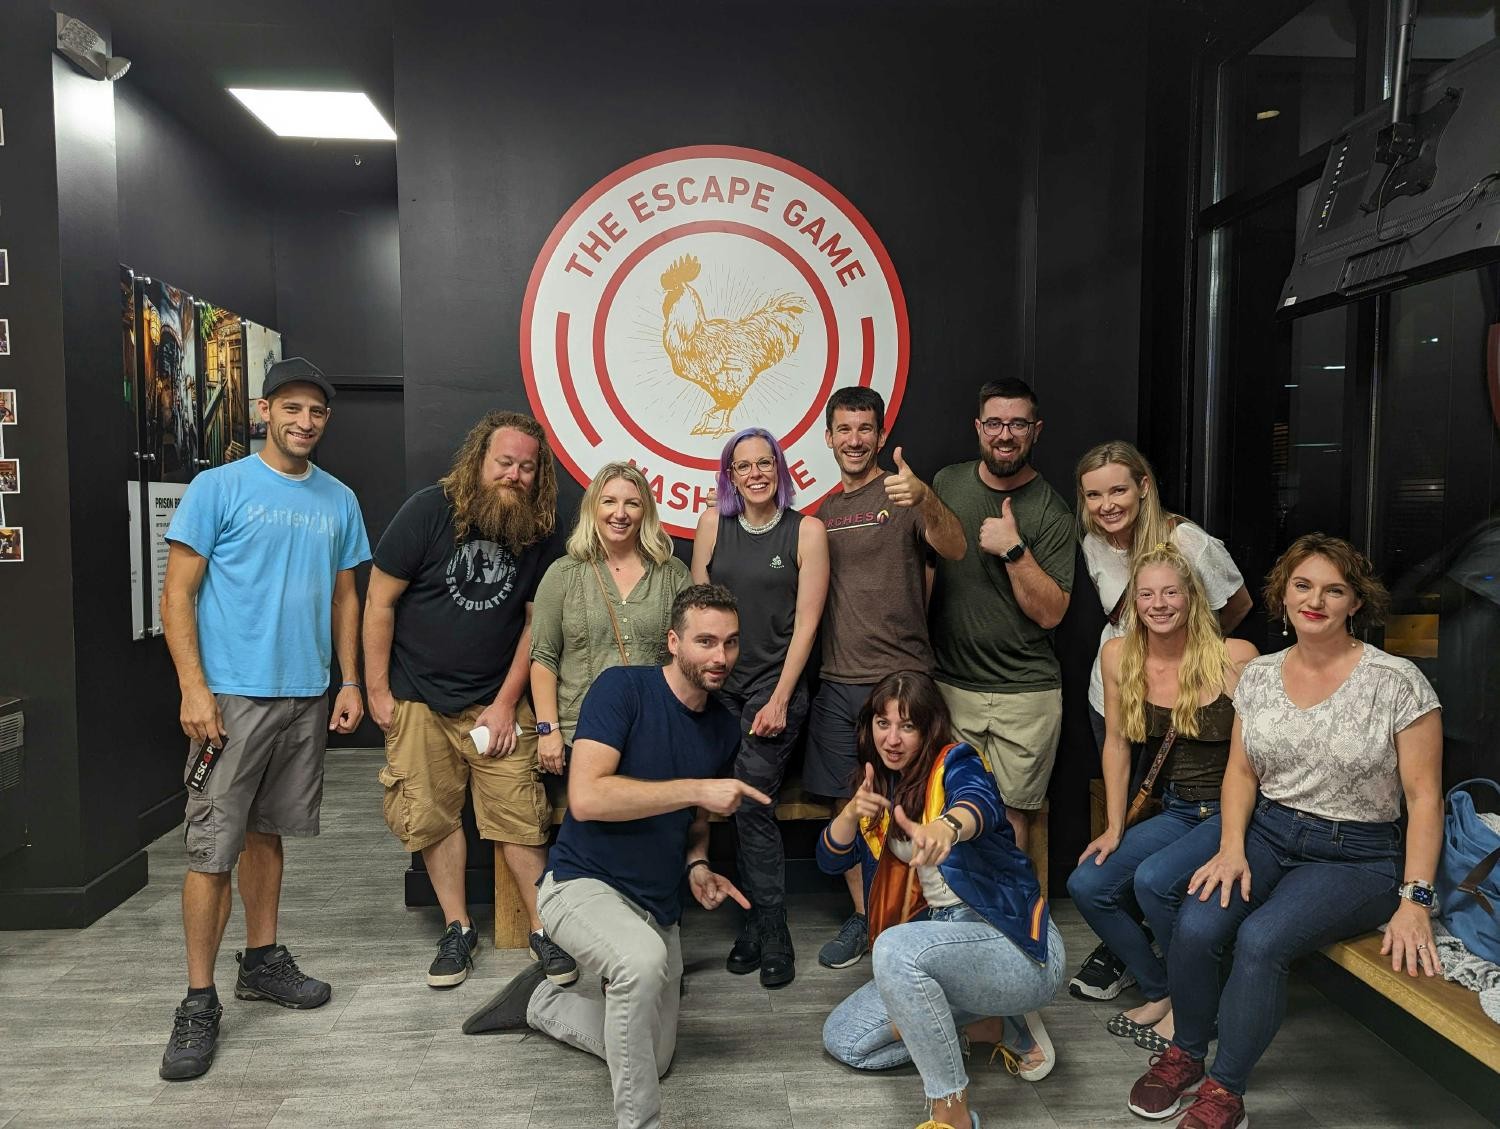 It is not a company wide retreat without an Escape Room